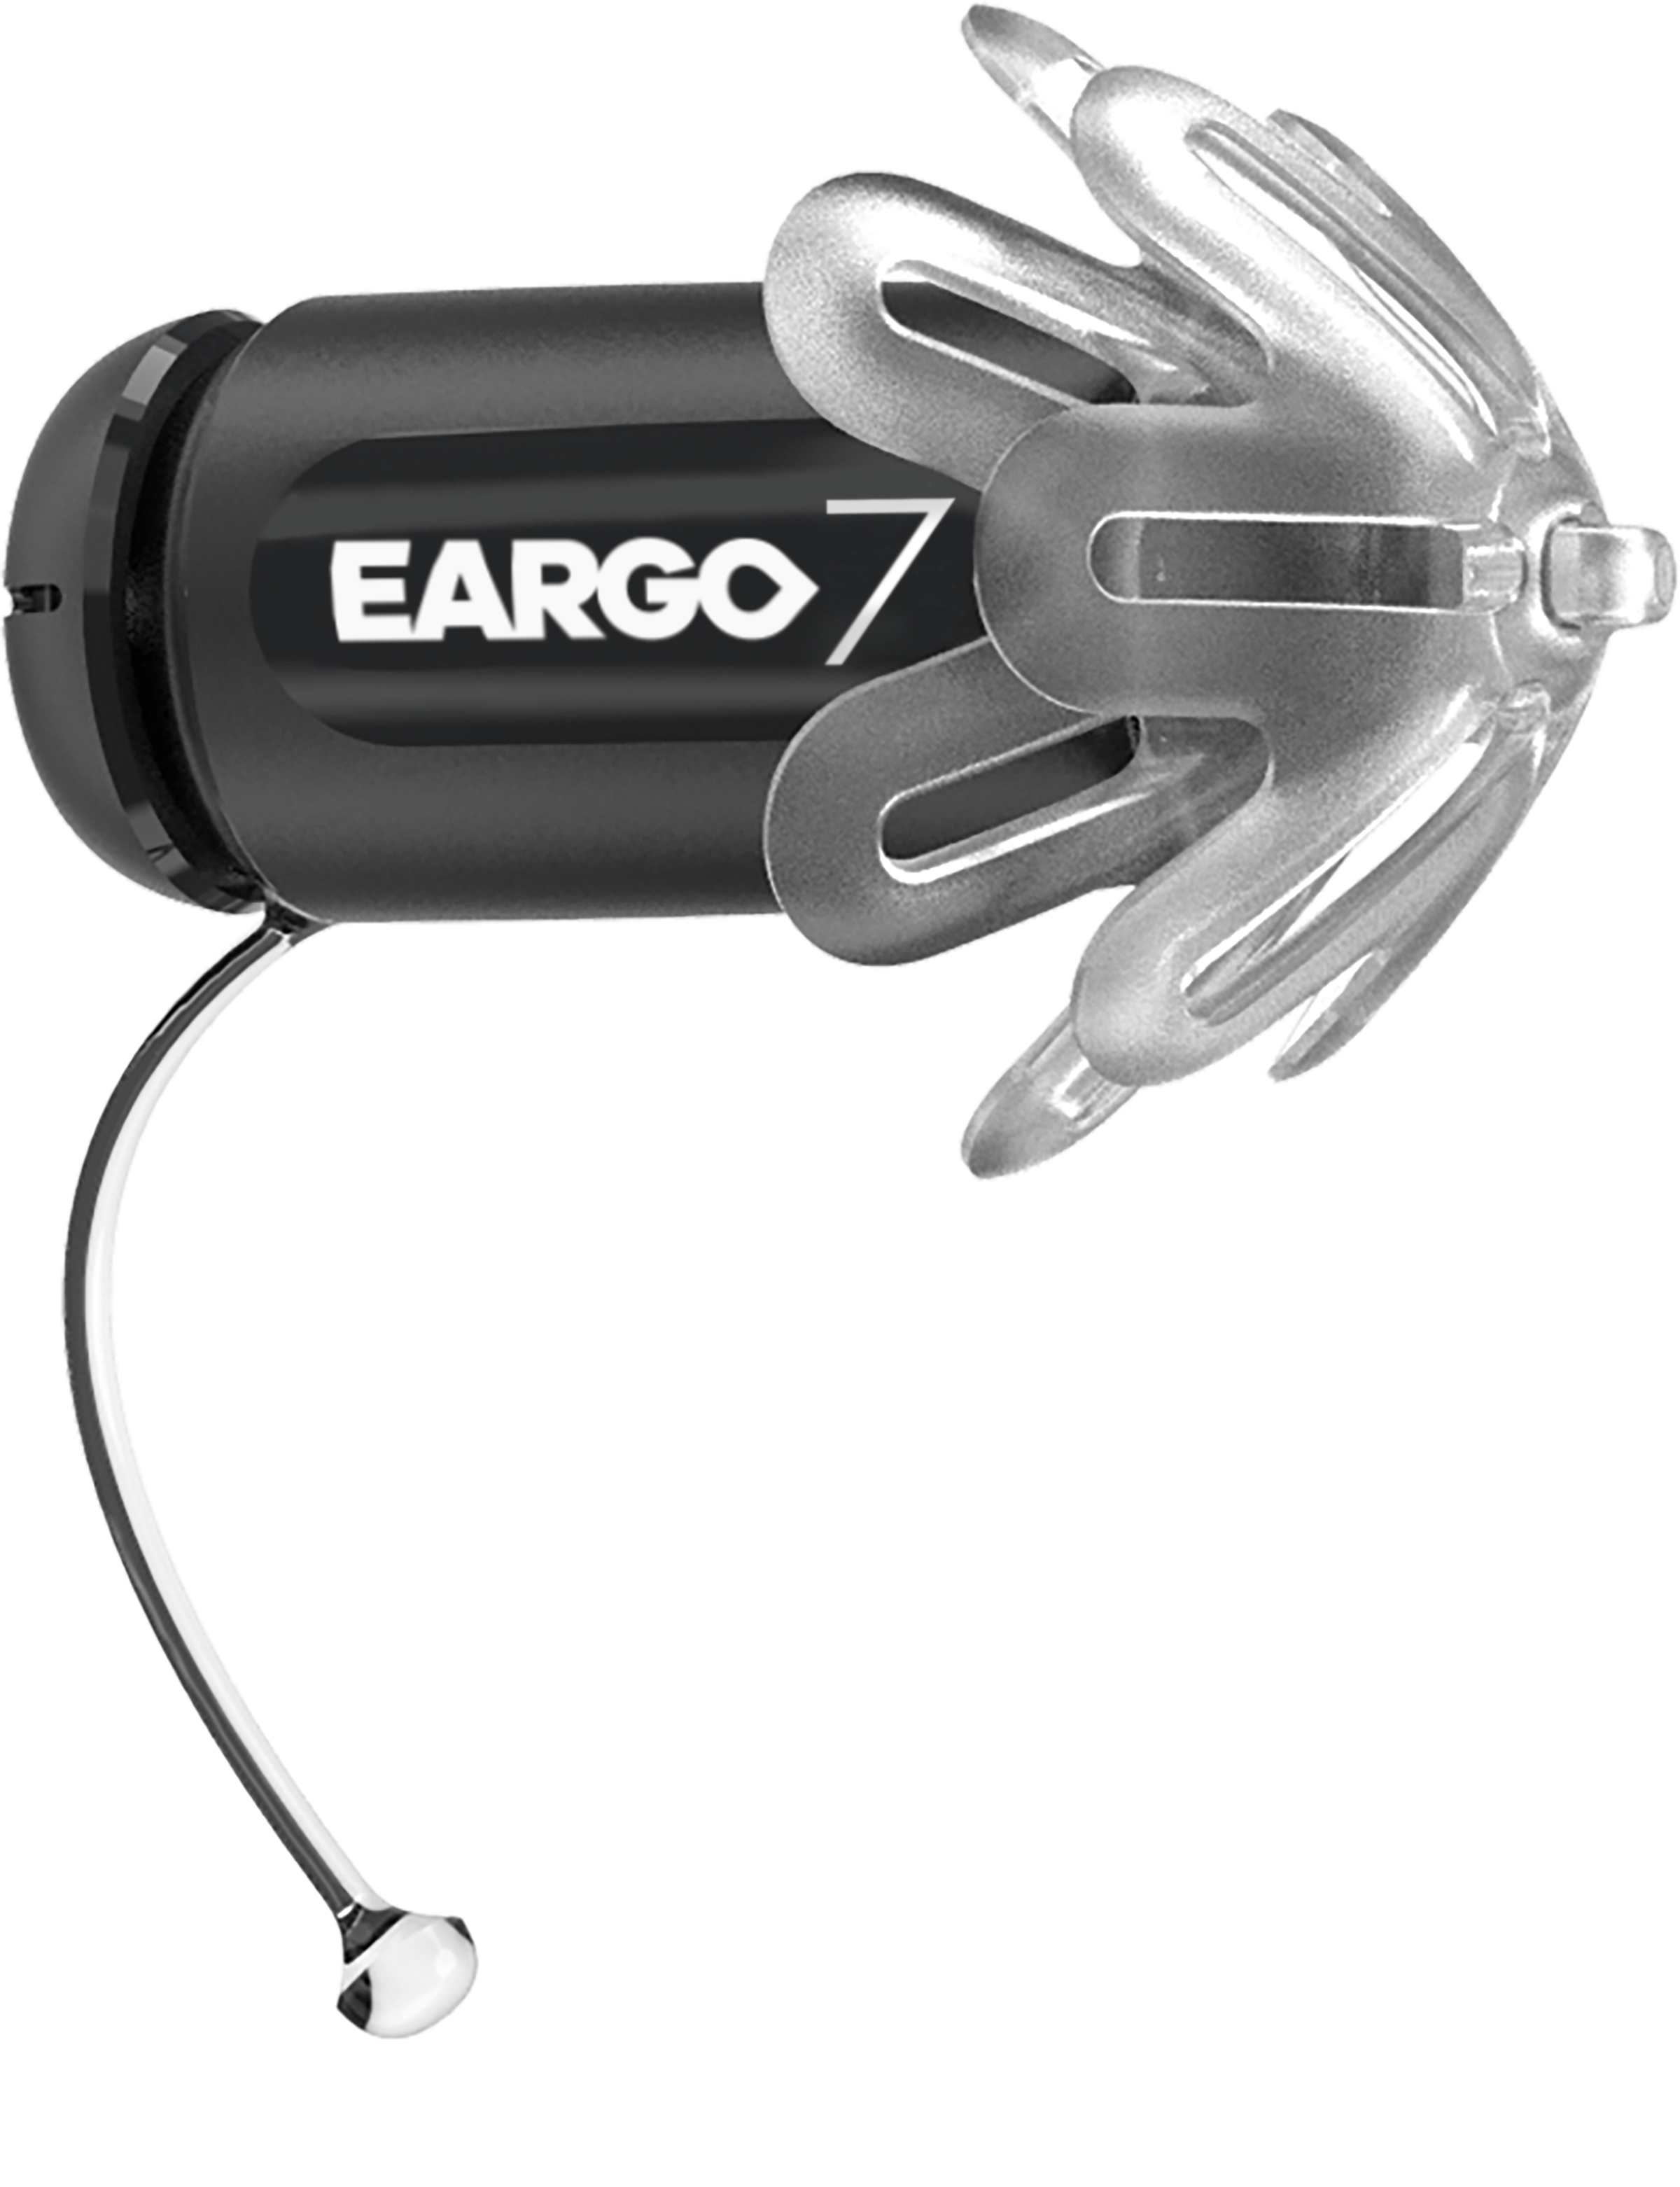 Close up of Eargo 7